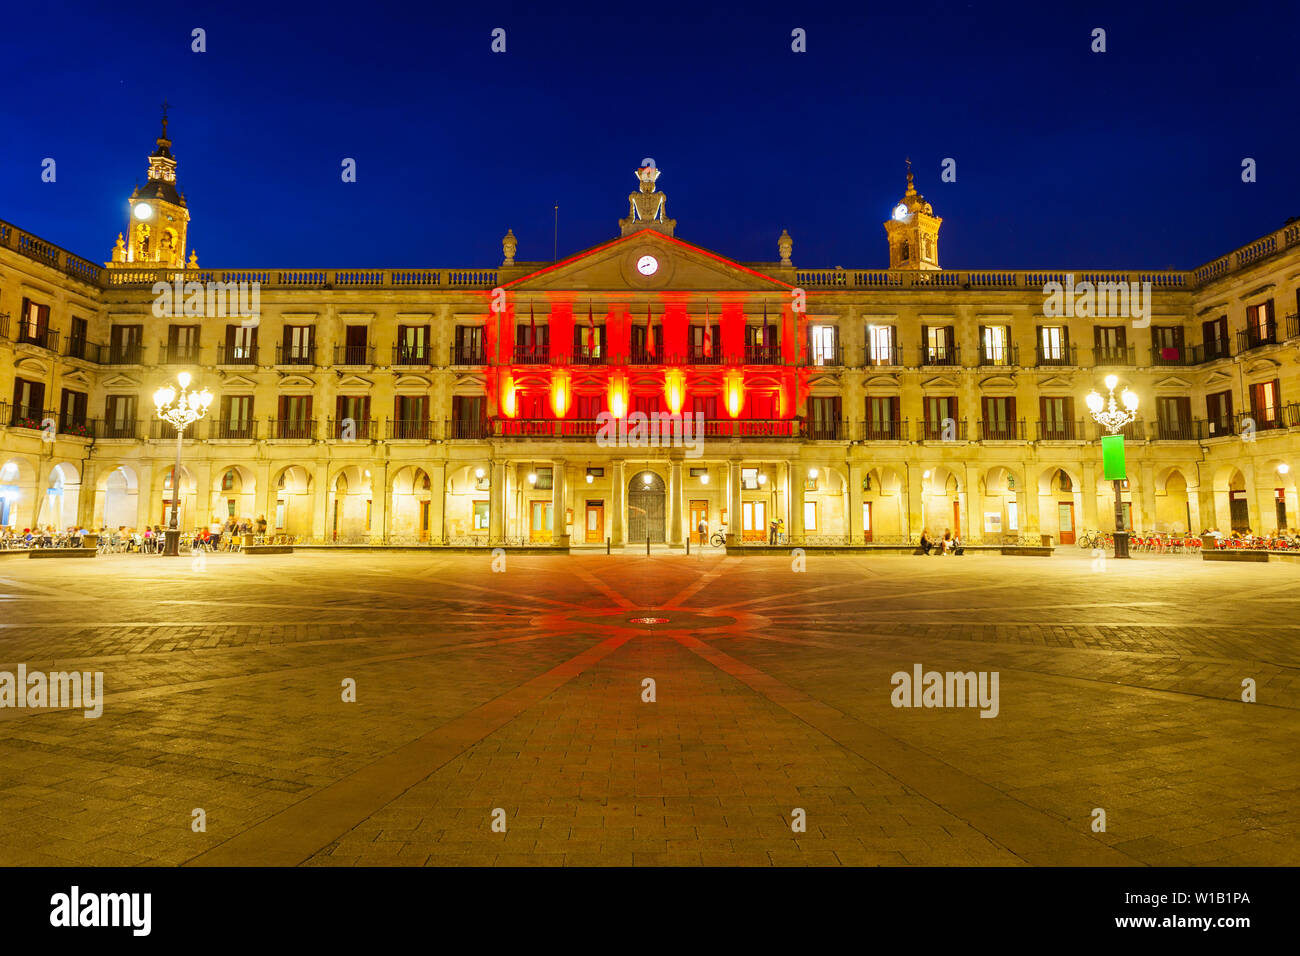 New Spain Square or Plaza Espana Nueva in Vitoria-Gasteiz city, Basque Country in northern Spain Stock Photo